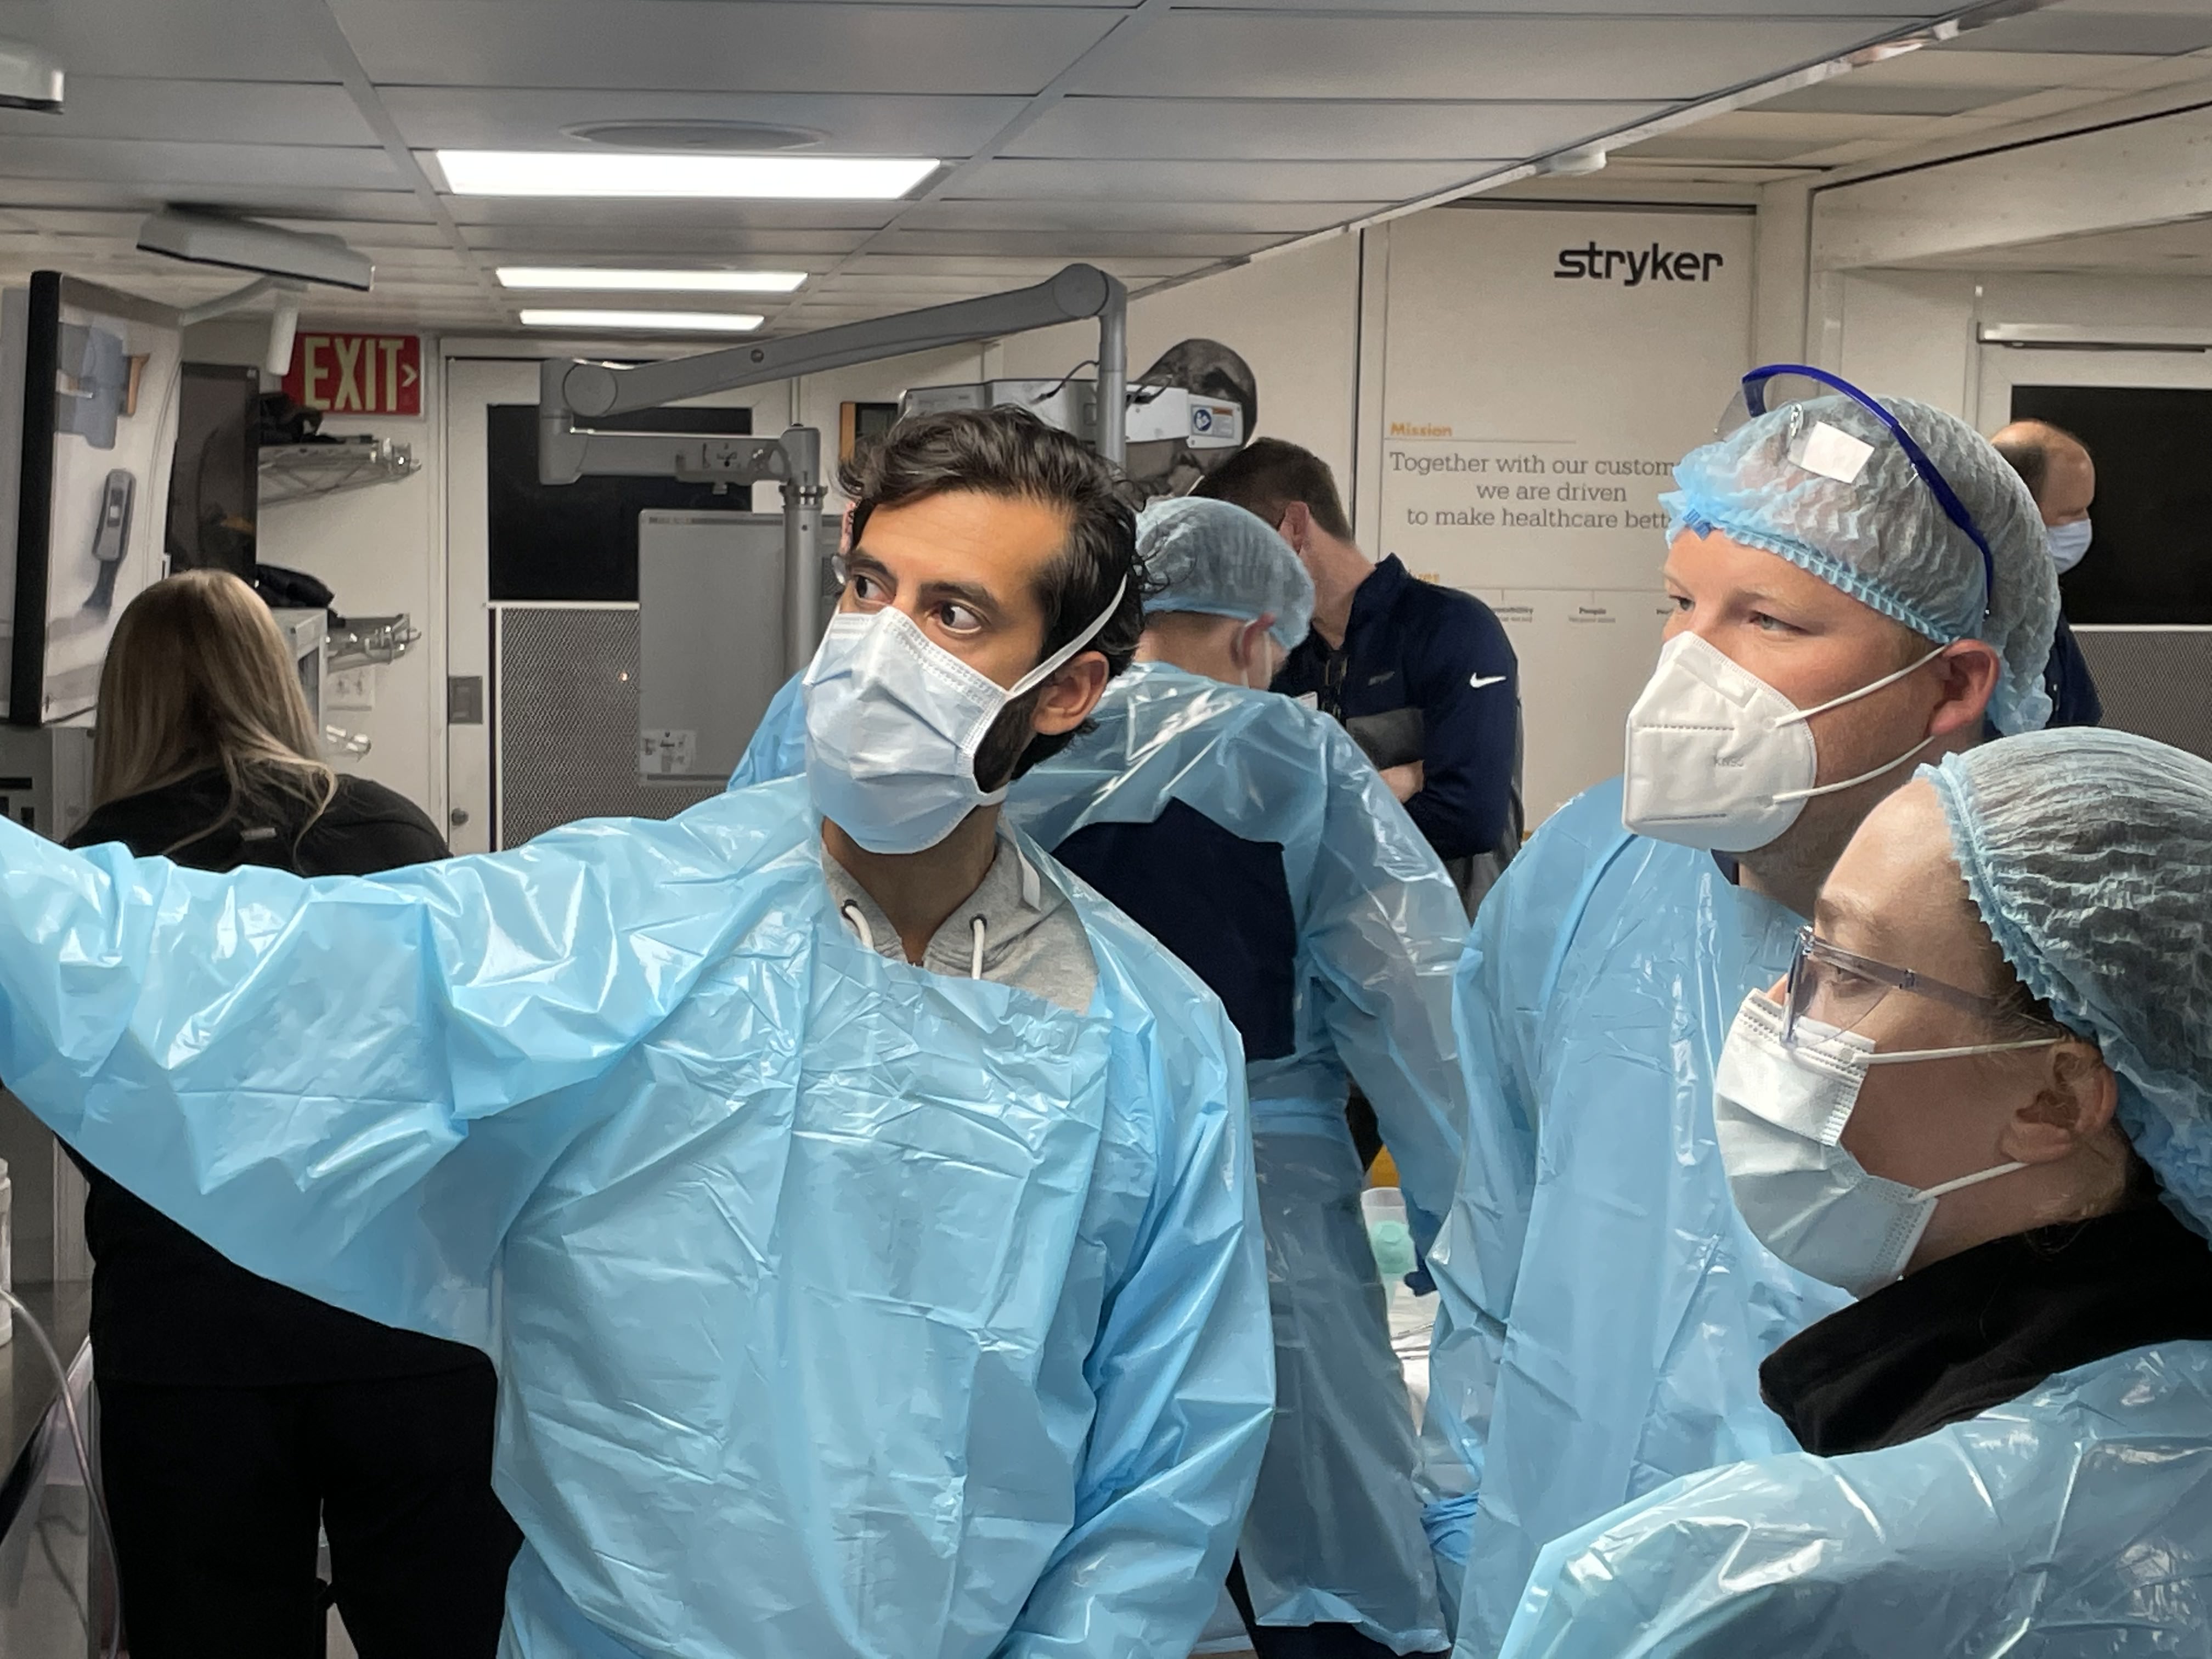 Dr. Saini teaches proper orientation of the endoscope compared to surgical instruments.